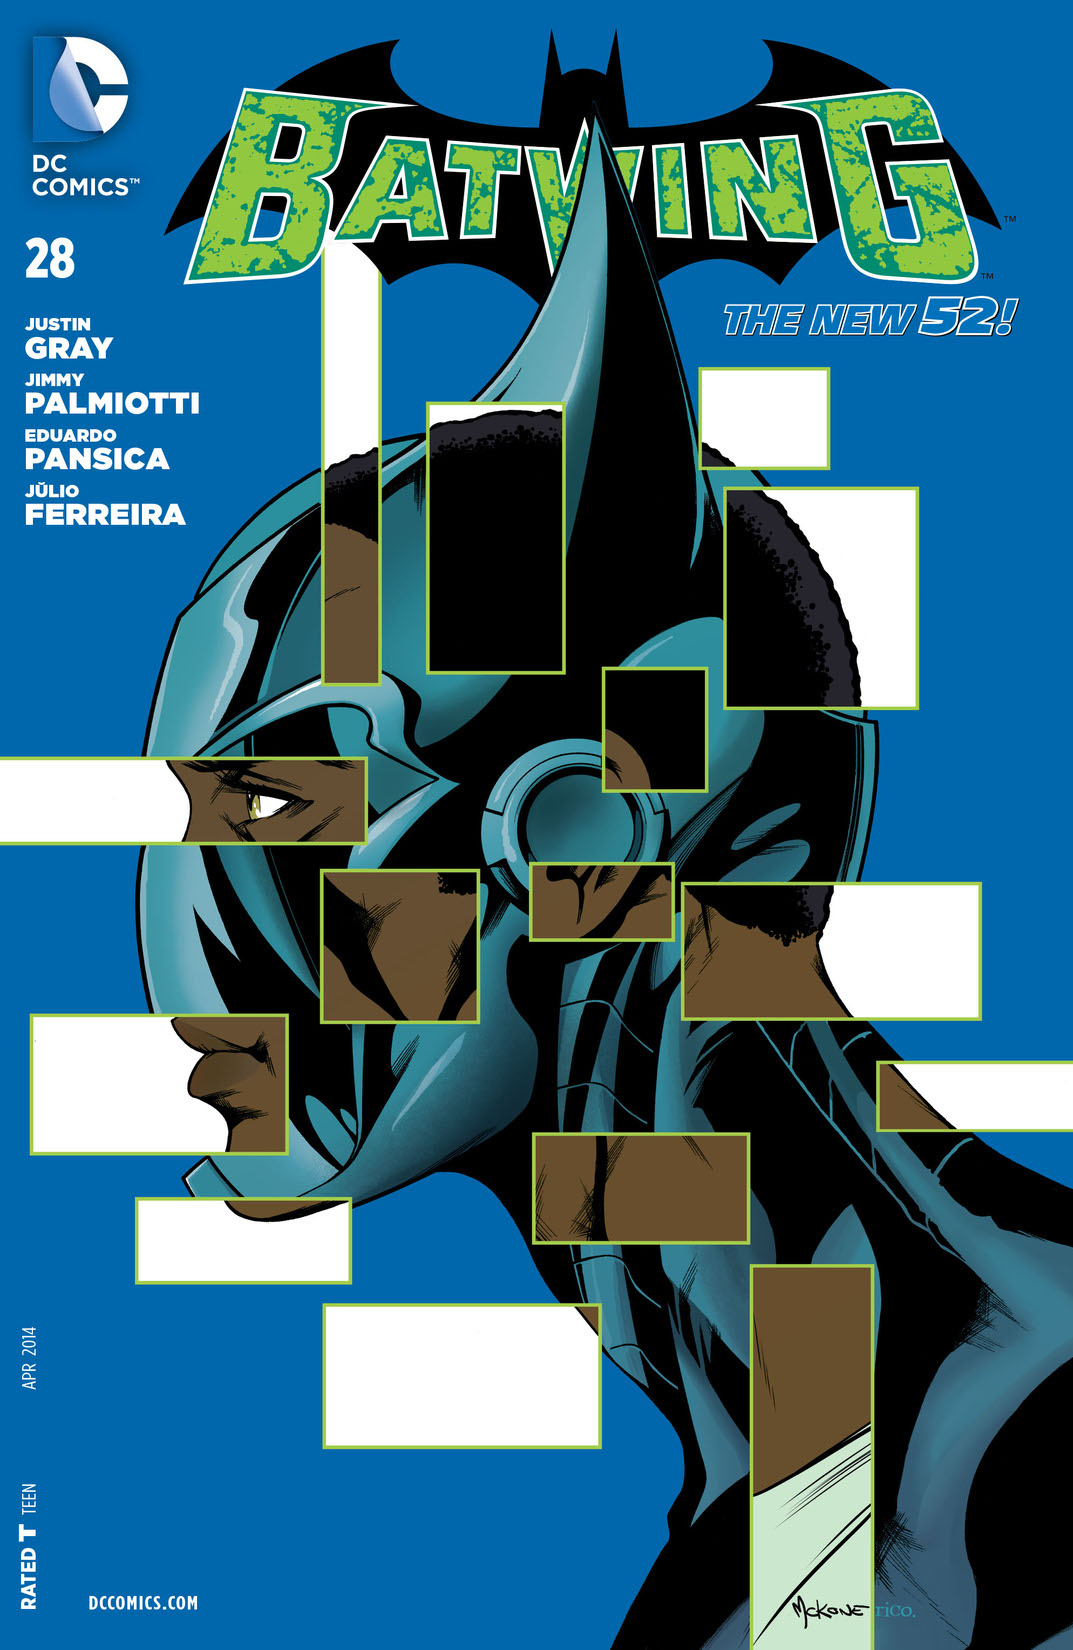 Batwing #28 preview images